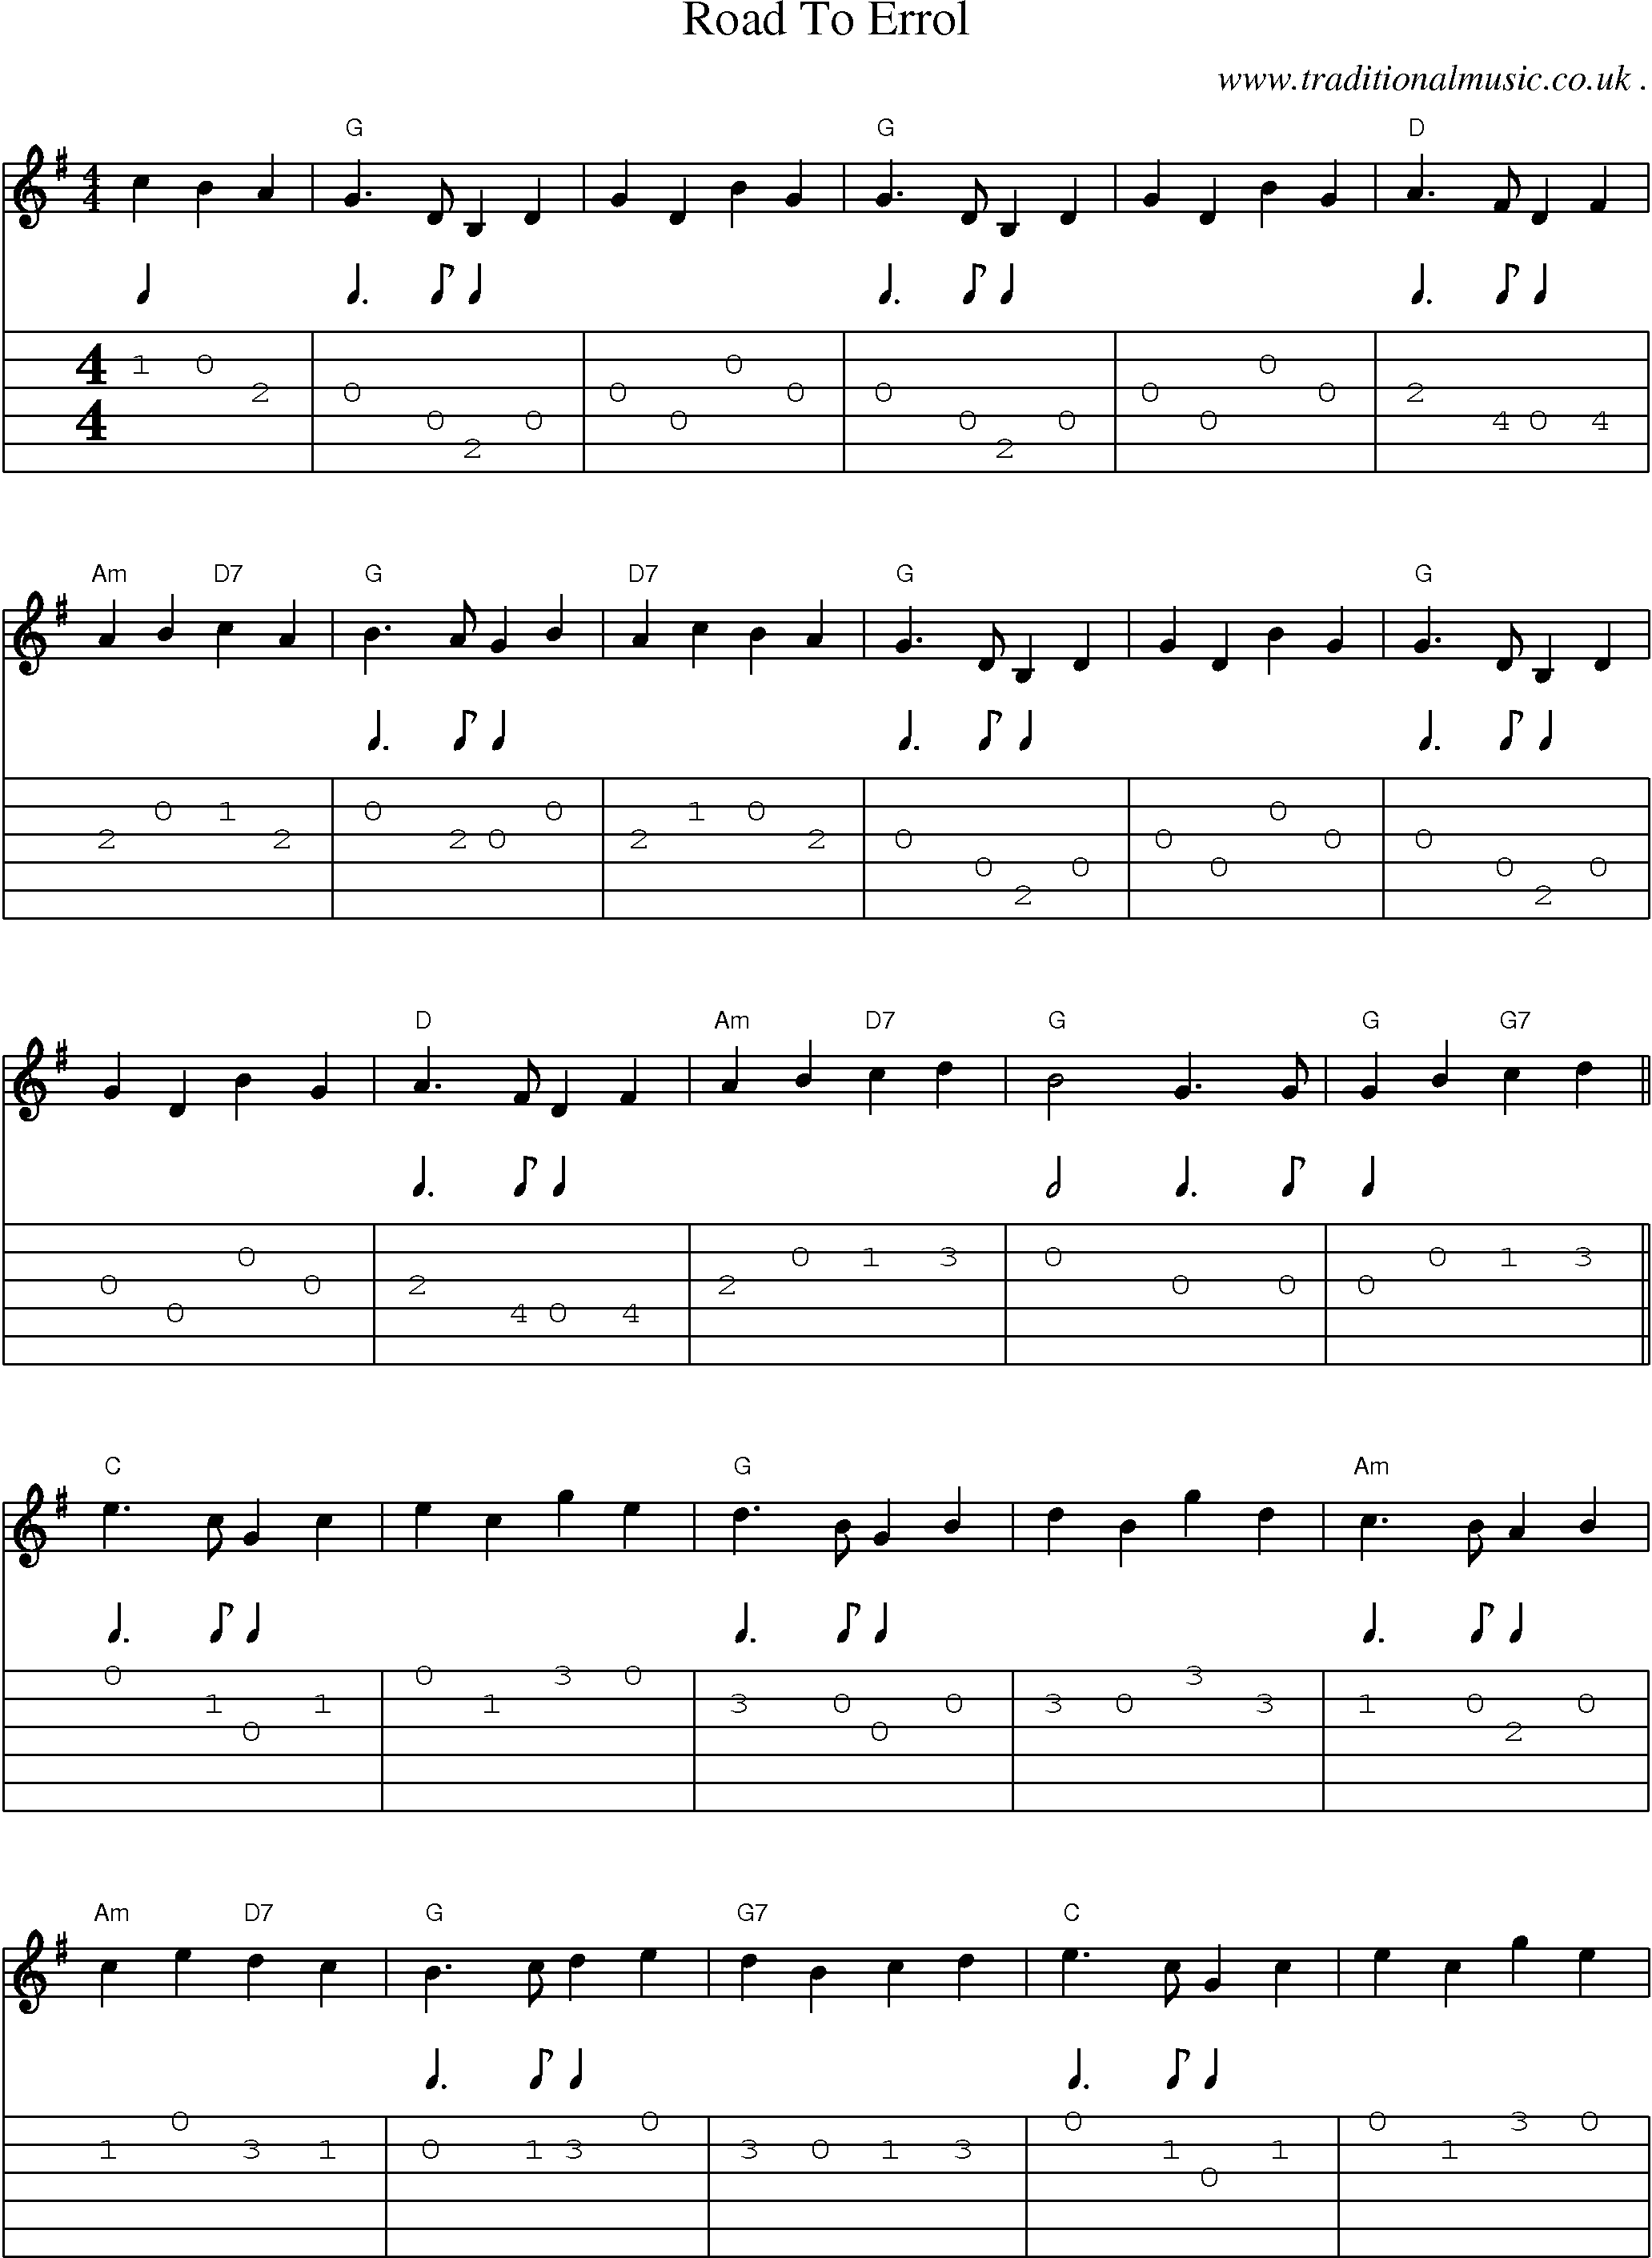 Sheet-Music and Guitar Tabs for Road To Errol